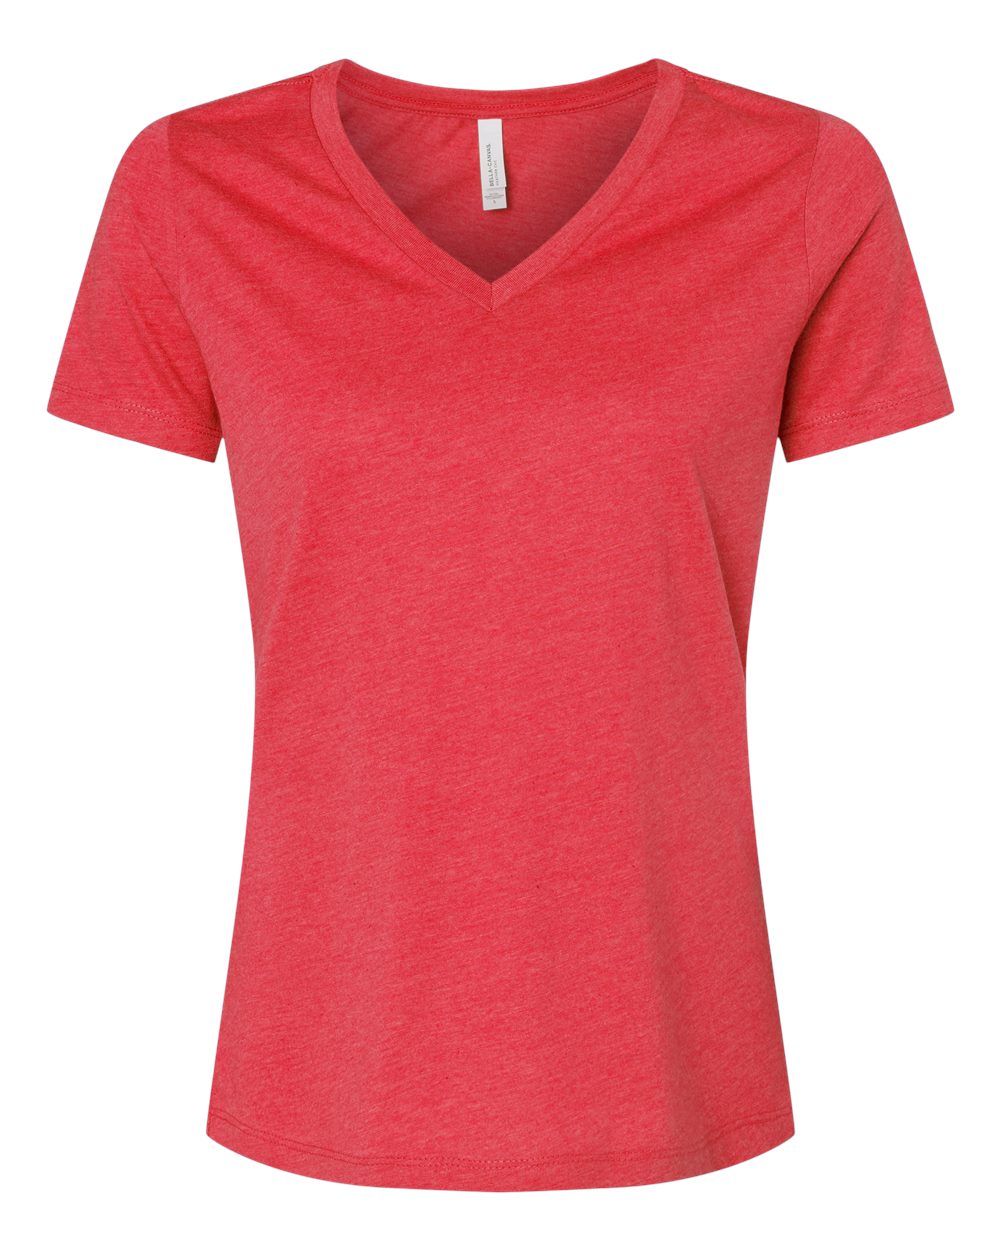 Bella + Canvas Women's Relaxed V-Neck CVC Tee (6405cvc) in Heather Red